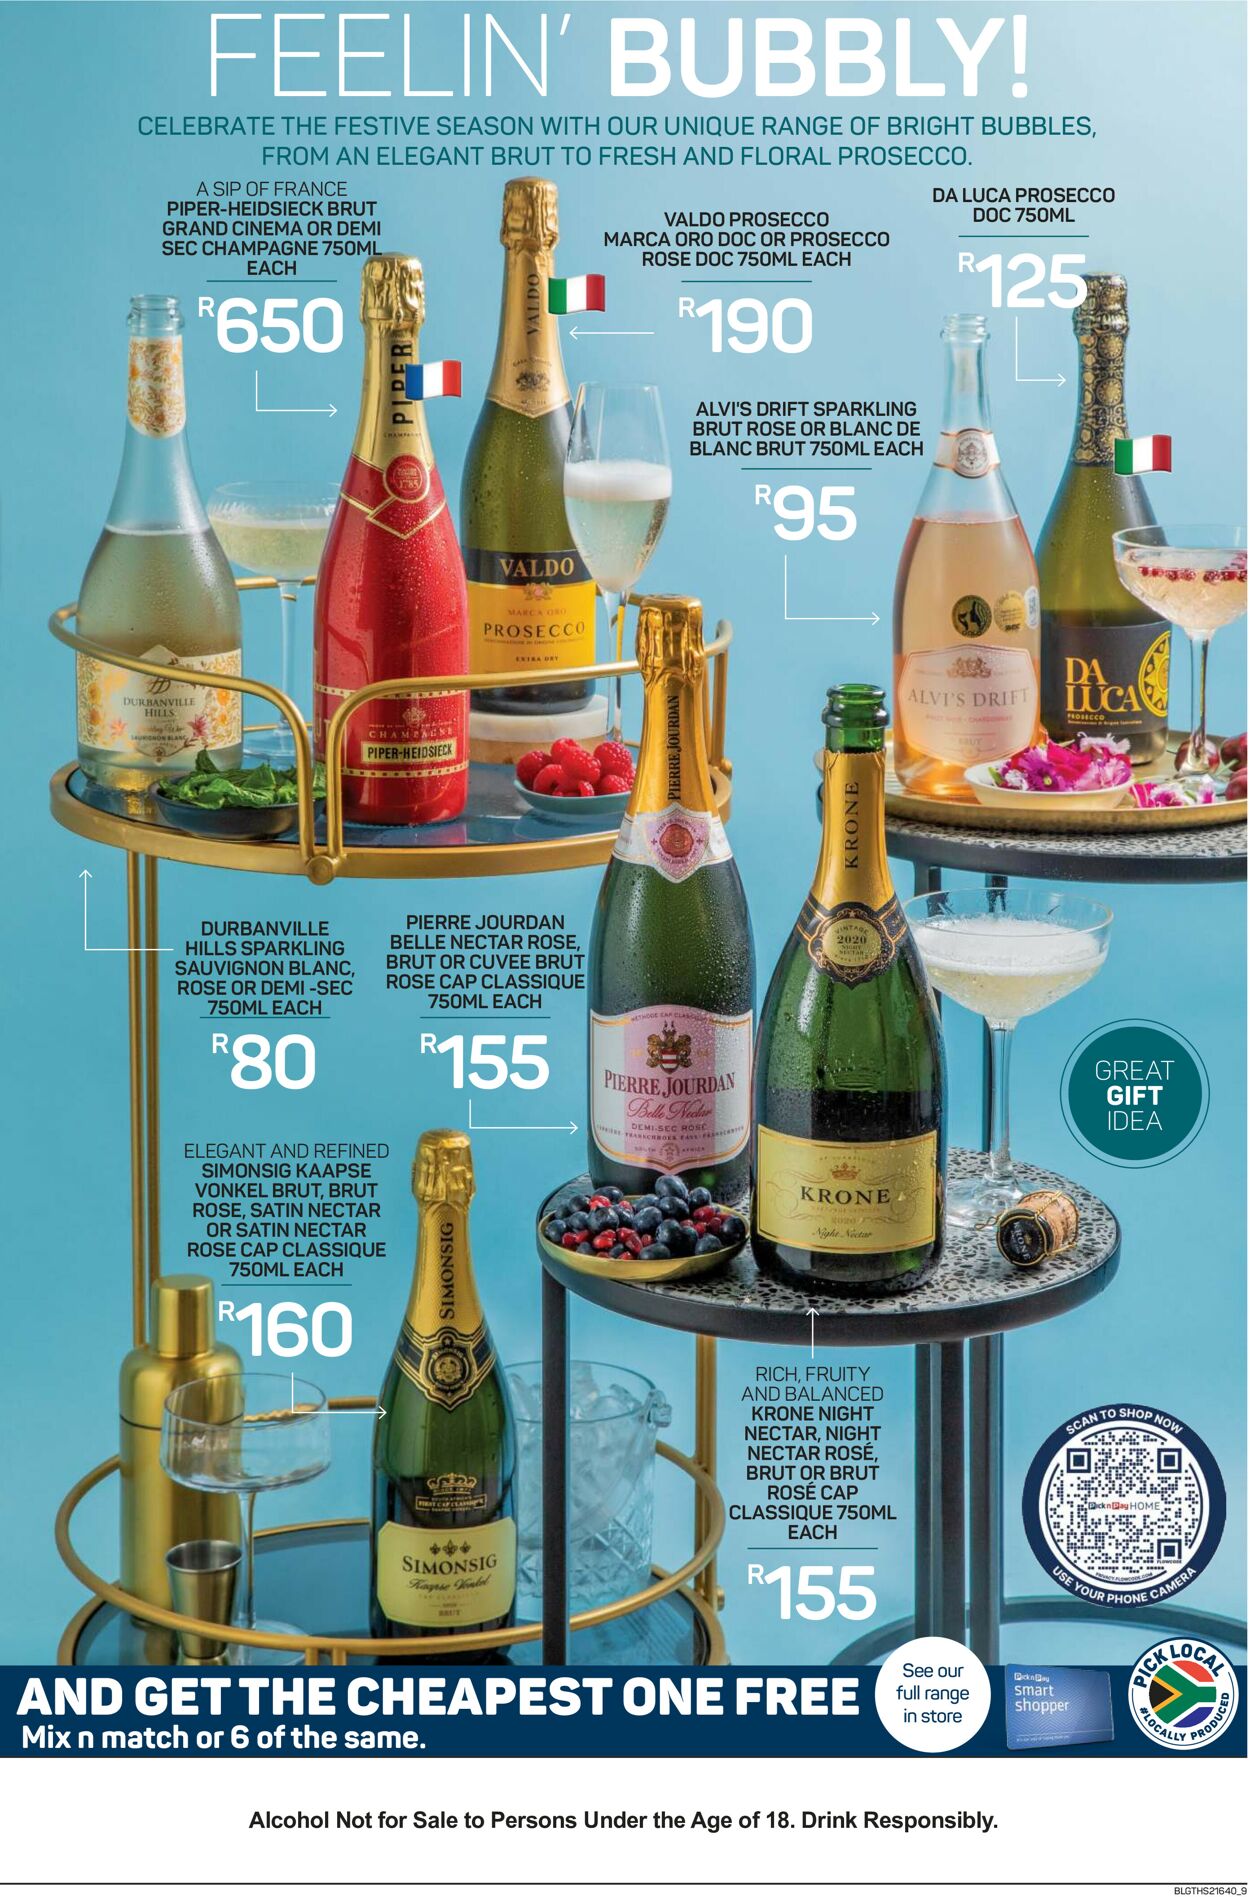 Pick n Pay Catalogue - 2022/12/12-2022/12/14 (Page 9)